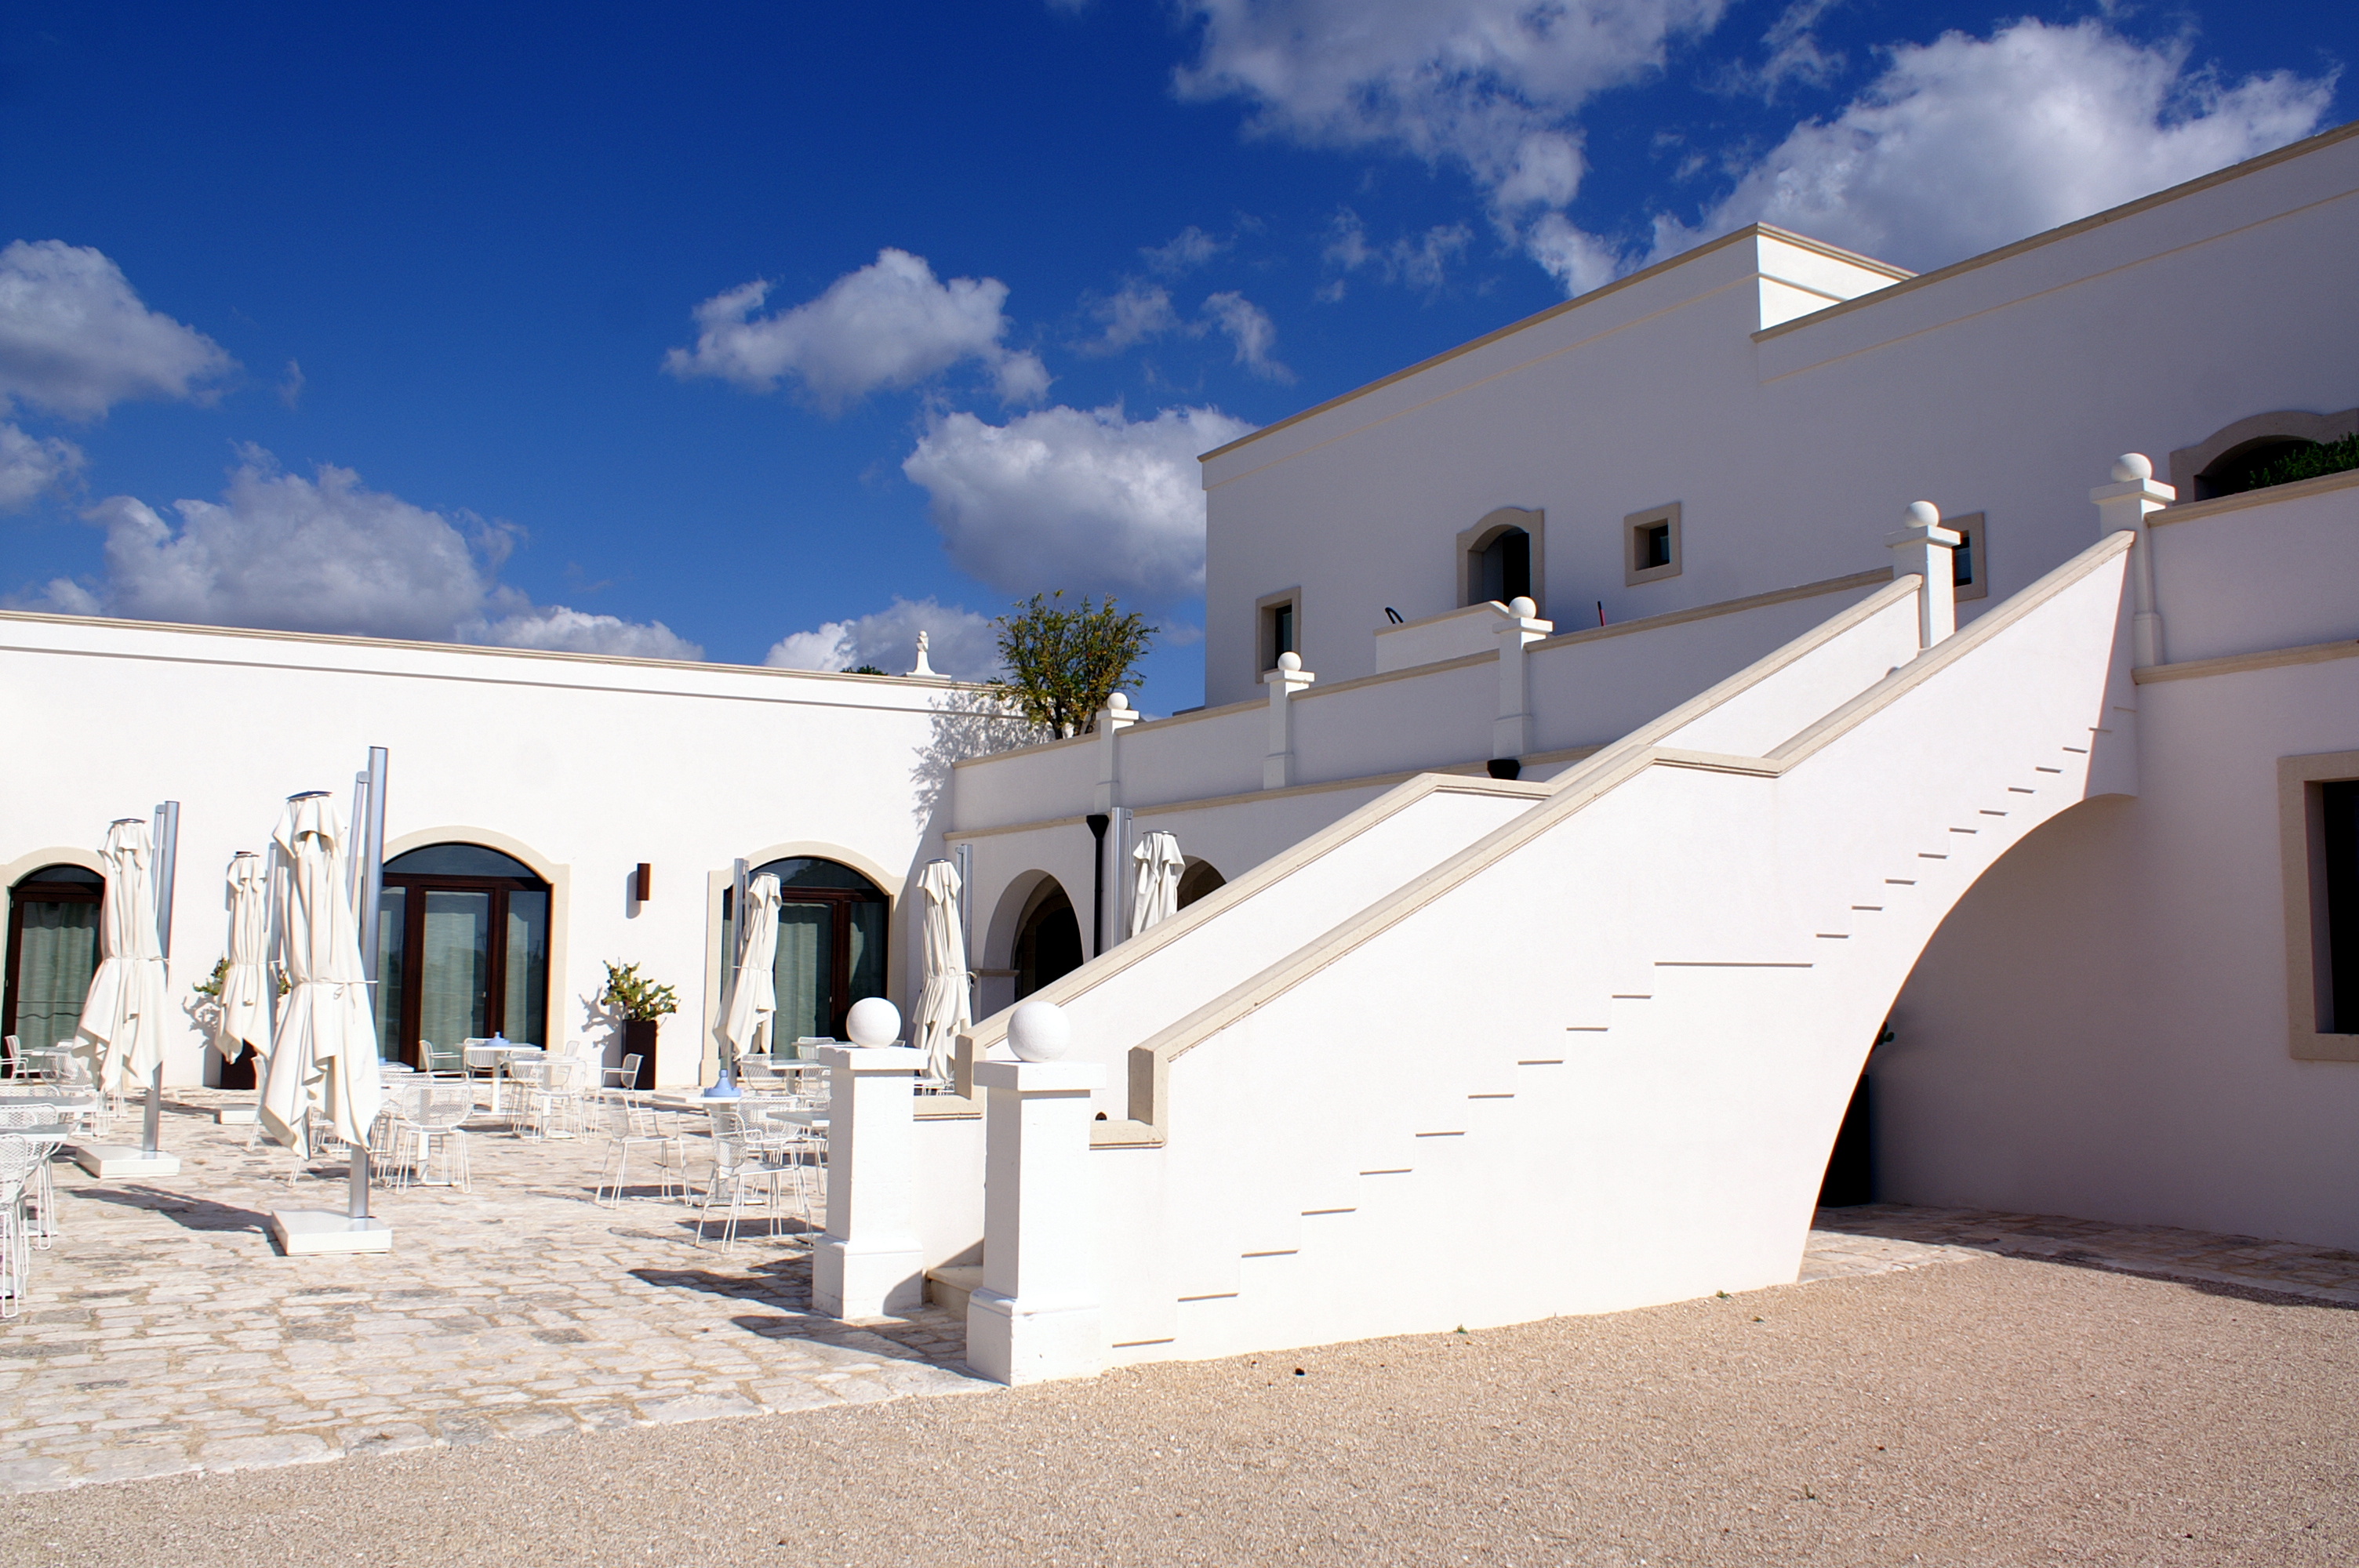 Courtyard stair, tables and upper floor of Masseria Bagnara in Lizzano, Puglia